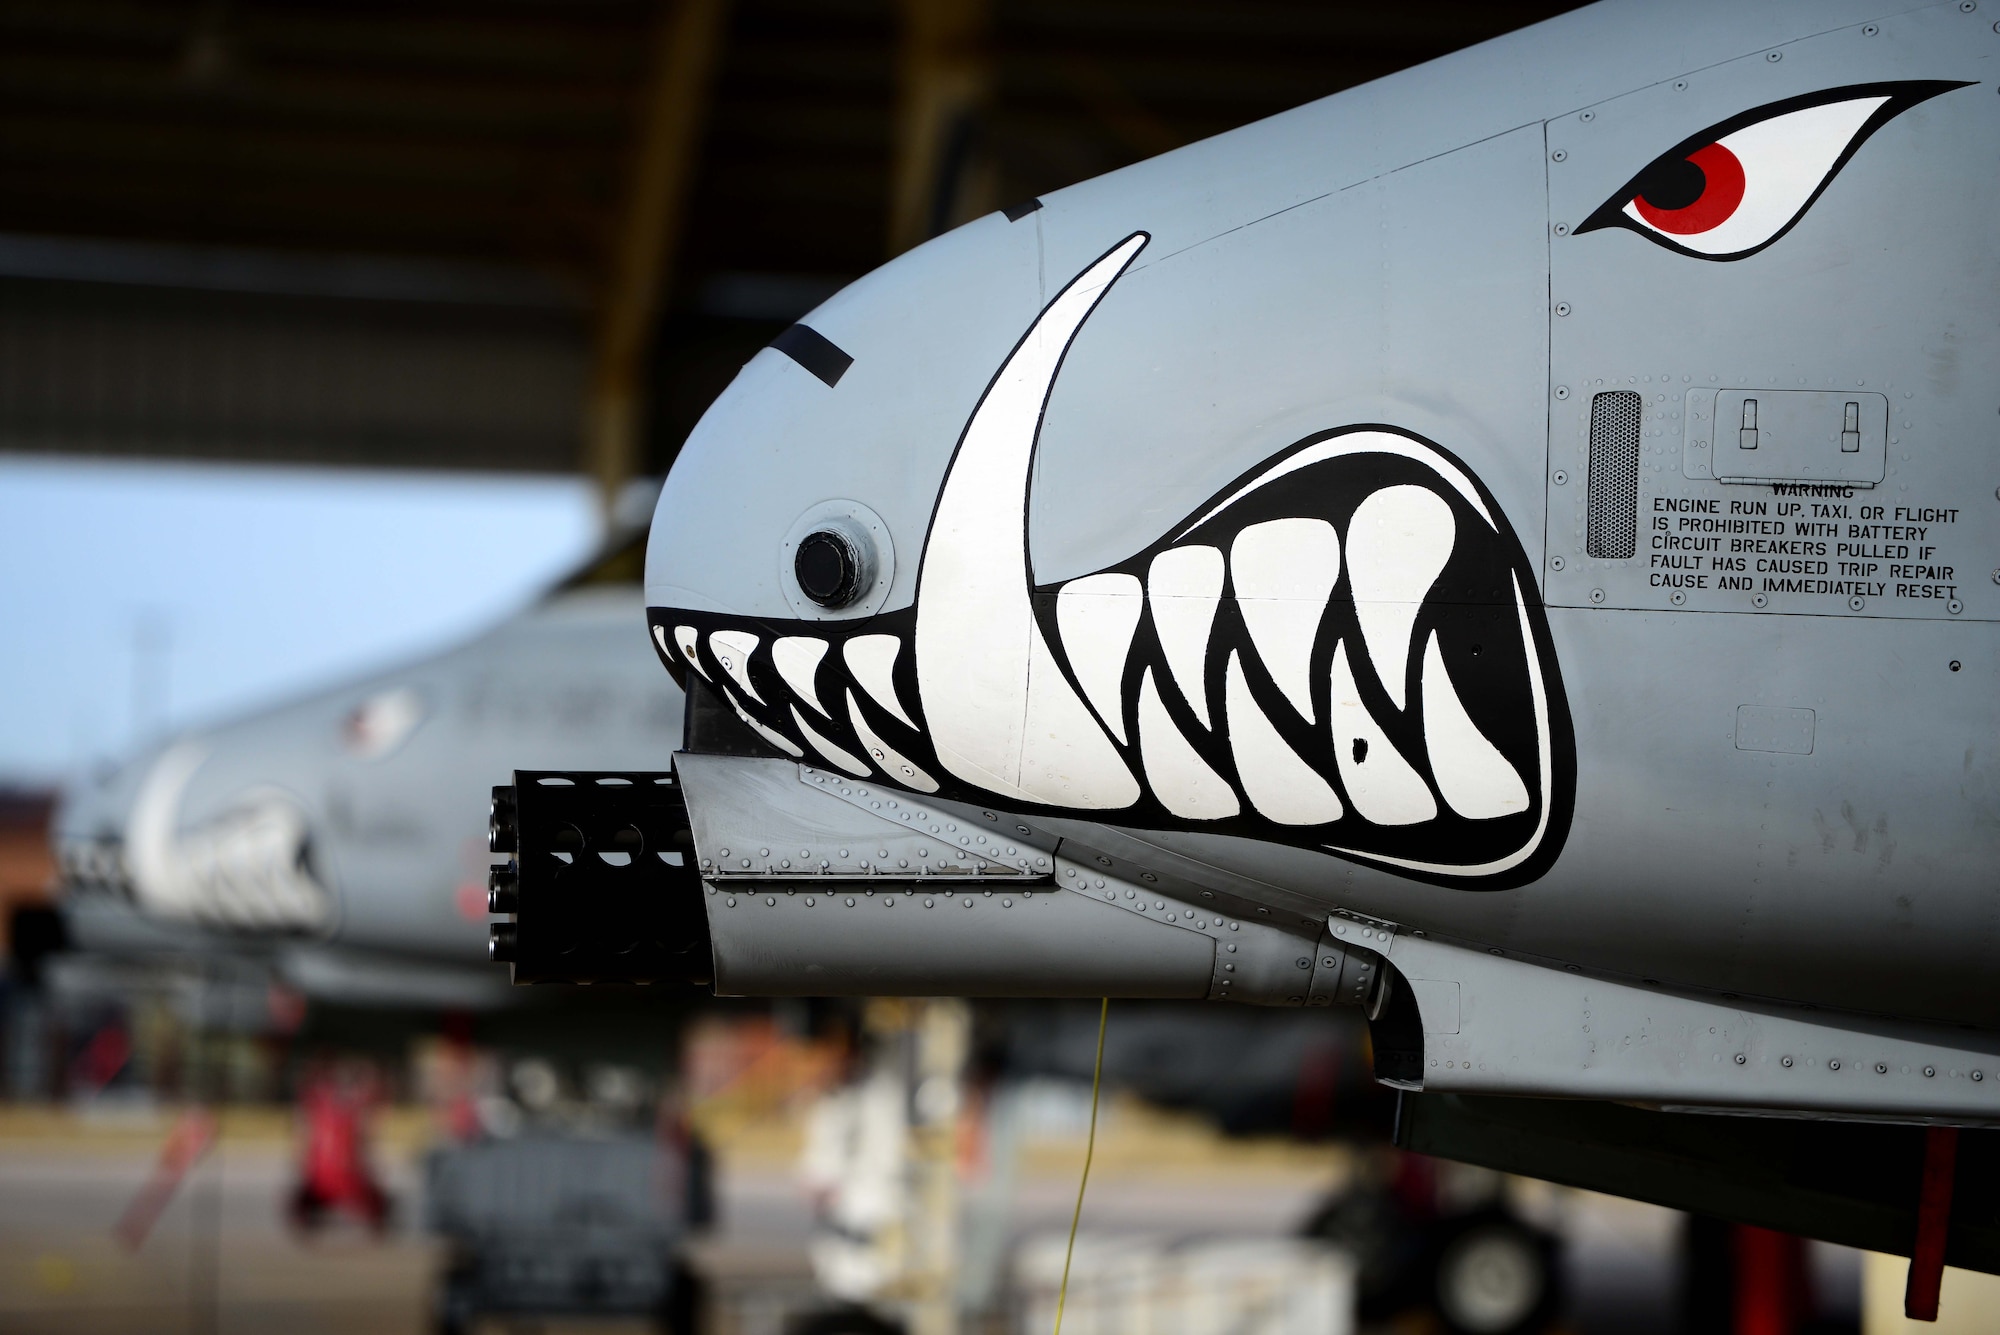 U.S. Air Force A-10 Thunderbolt II aircraft sit on the flightline at Whiteman Air Force Base, Mo., Feb. 14, 2017. The A-10 Thunderbolt II has excellent maneuverability at low air speeds and altitude, and is a highly accurate and survivable weapons-delivery platform. The aircraft can loiter near battle areas for extended periods of time and operate in low ceiling and visibility conditions.